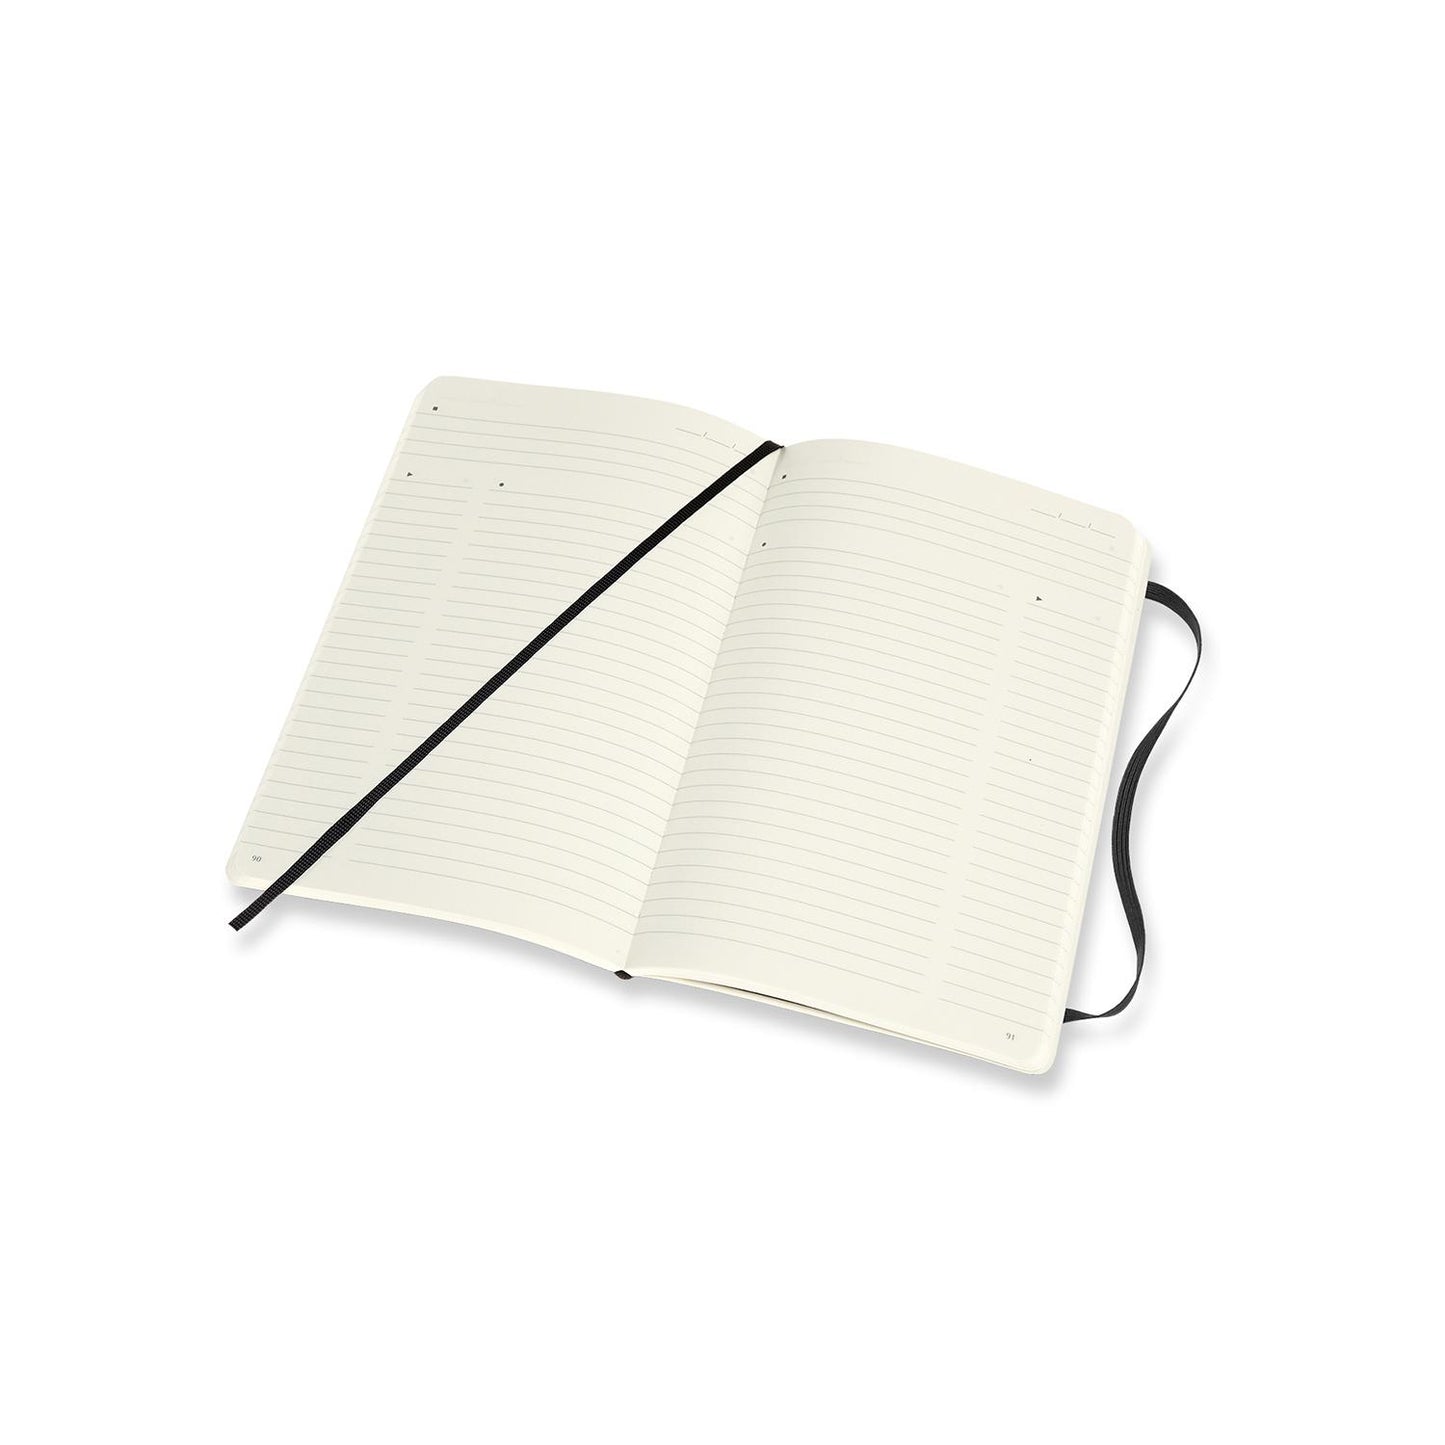 Professional Large Soft Cover Notebook Black